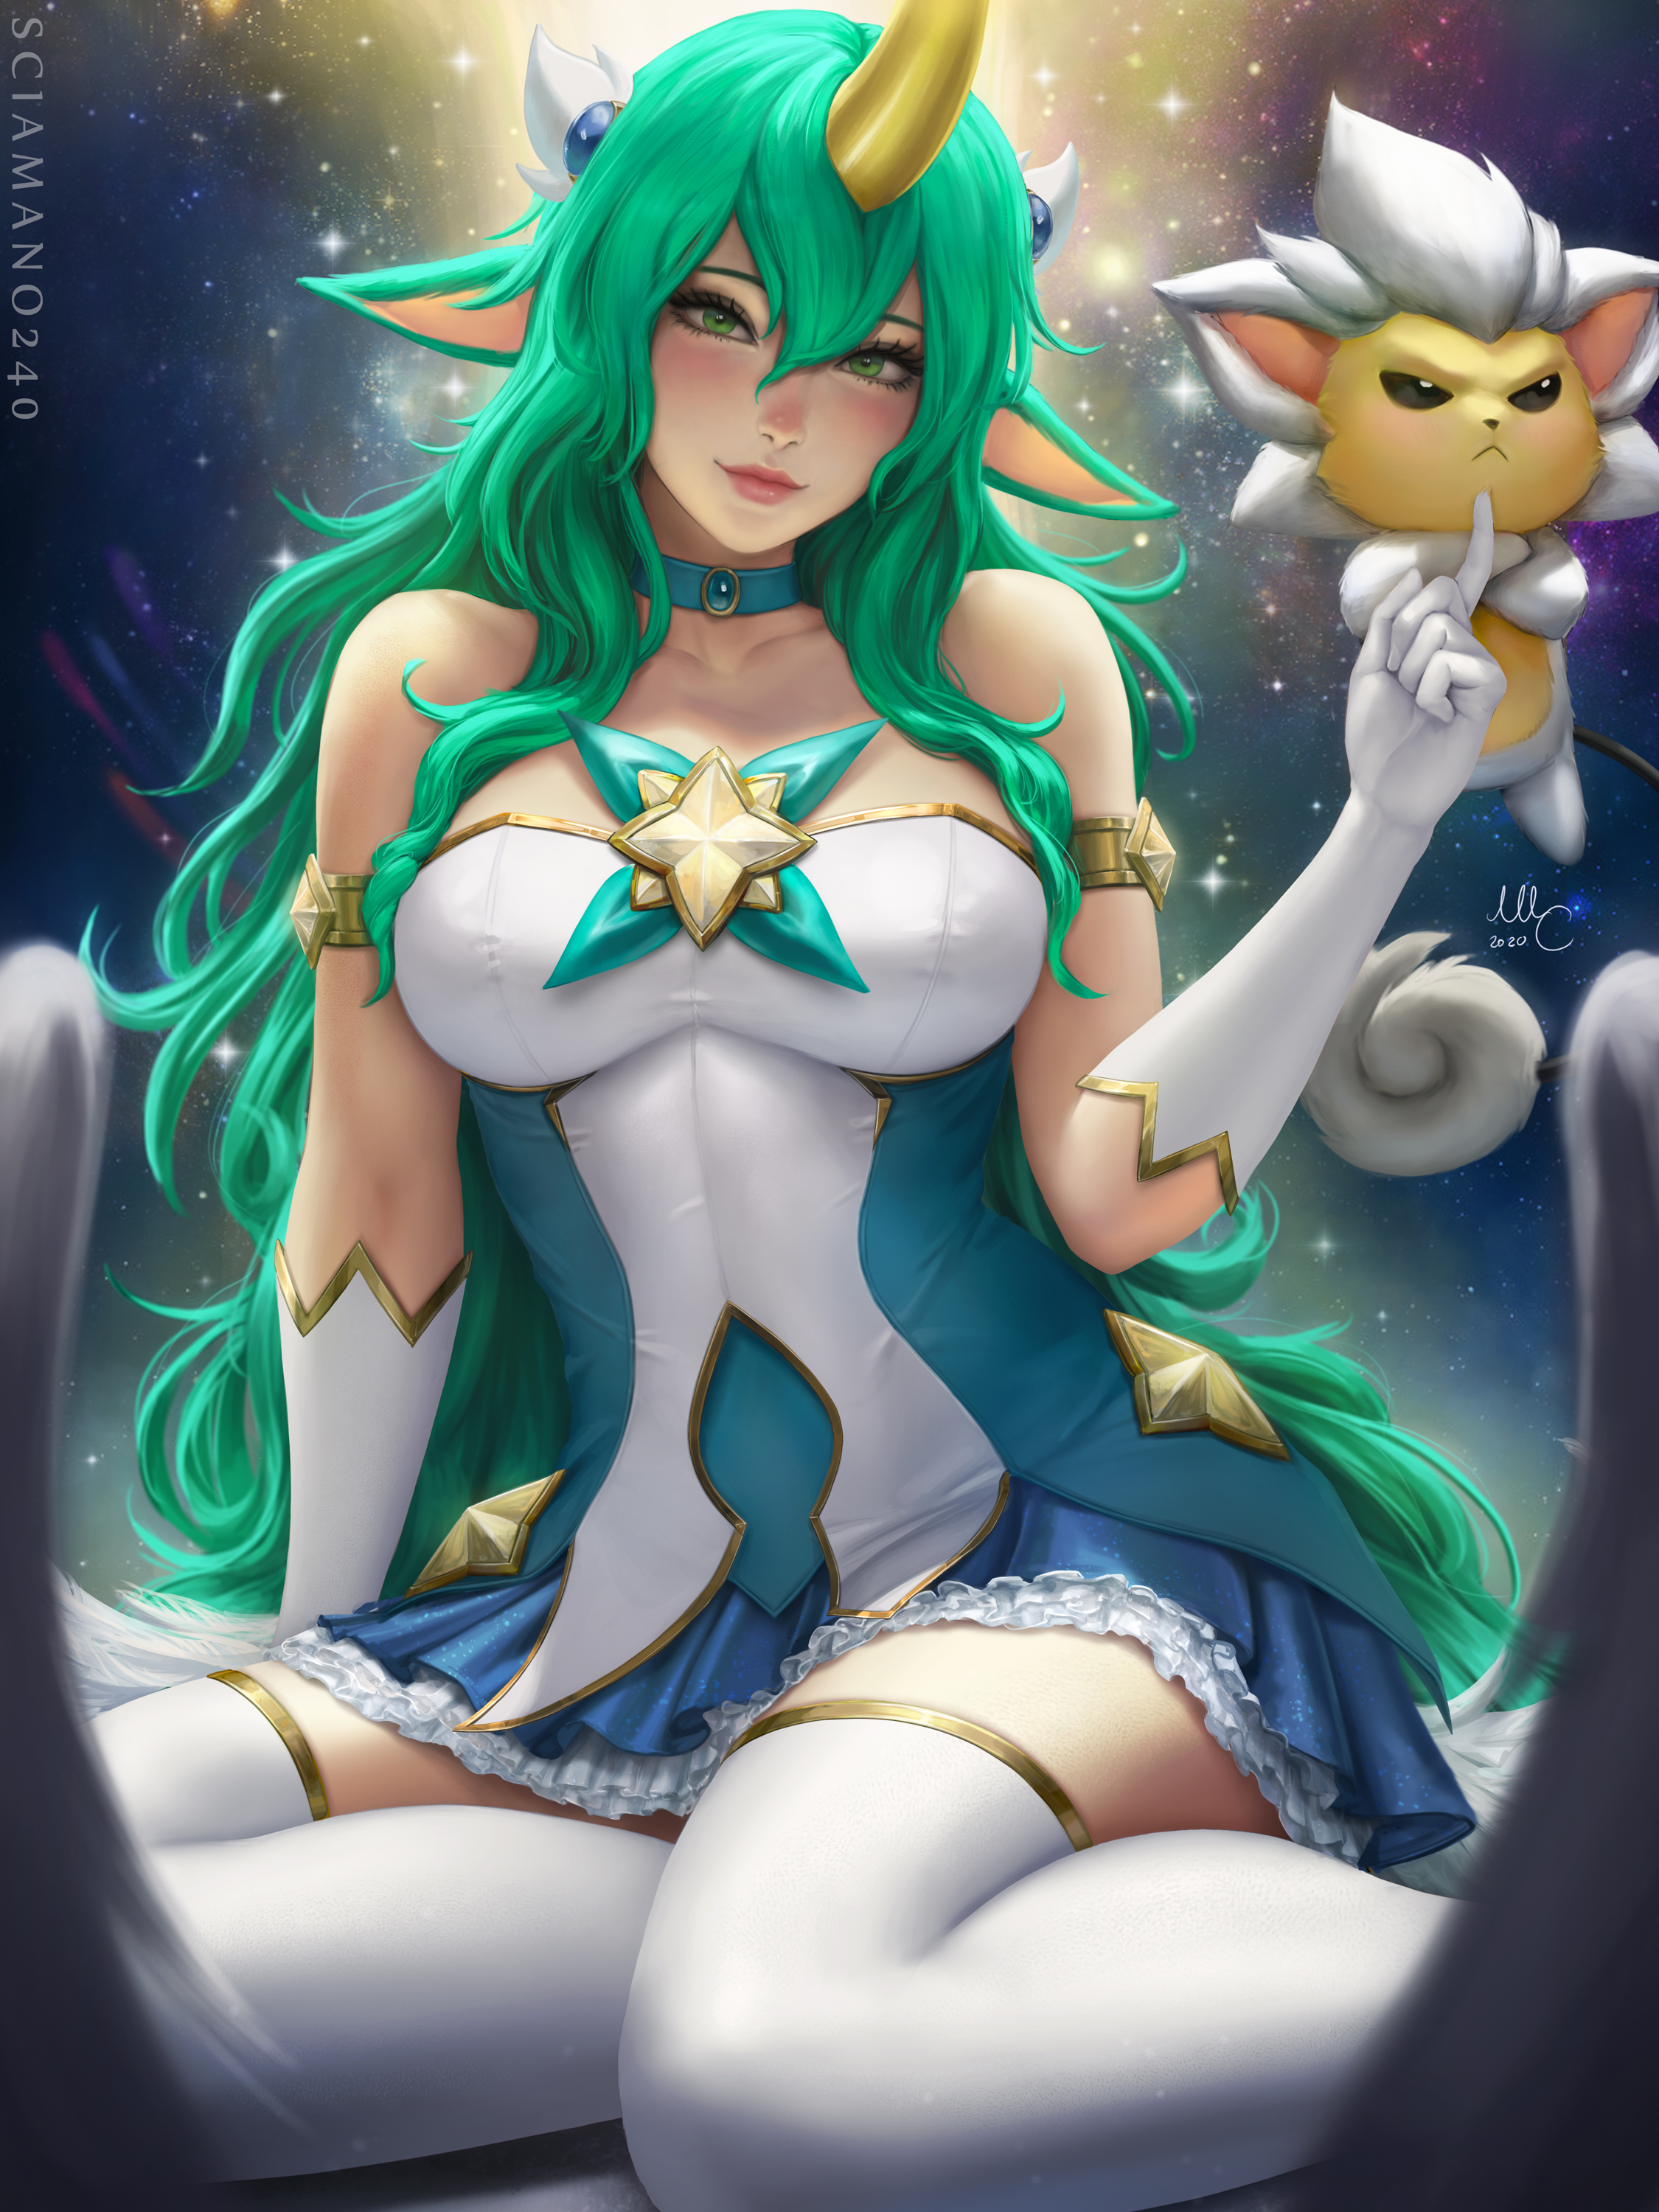 General 2250x3000 Mirco Cabbia drawing Soraka (League of Legends) green hair green eyes stars horns long hair wavy hair dress choker thigh-highs women pointy ears PC gaming video game characters video game girls stockings white stockings looking at viewer fantasy art fantasy girl gloves League of Legends watermarked